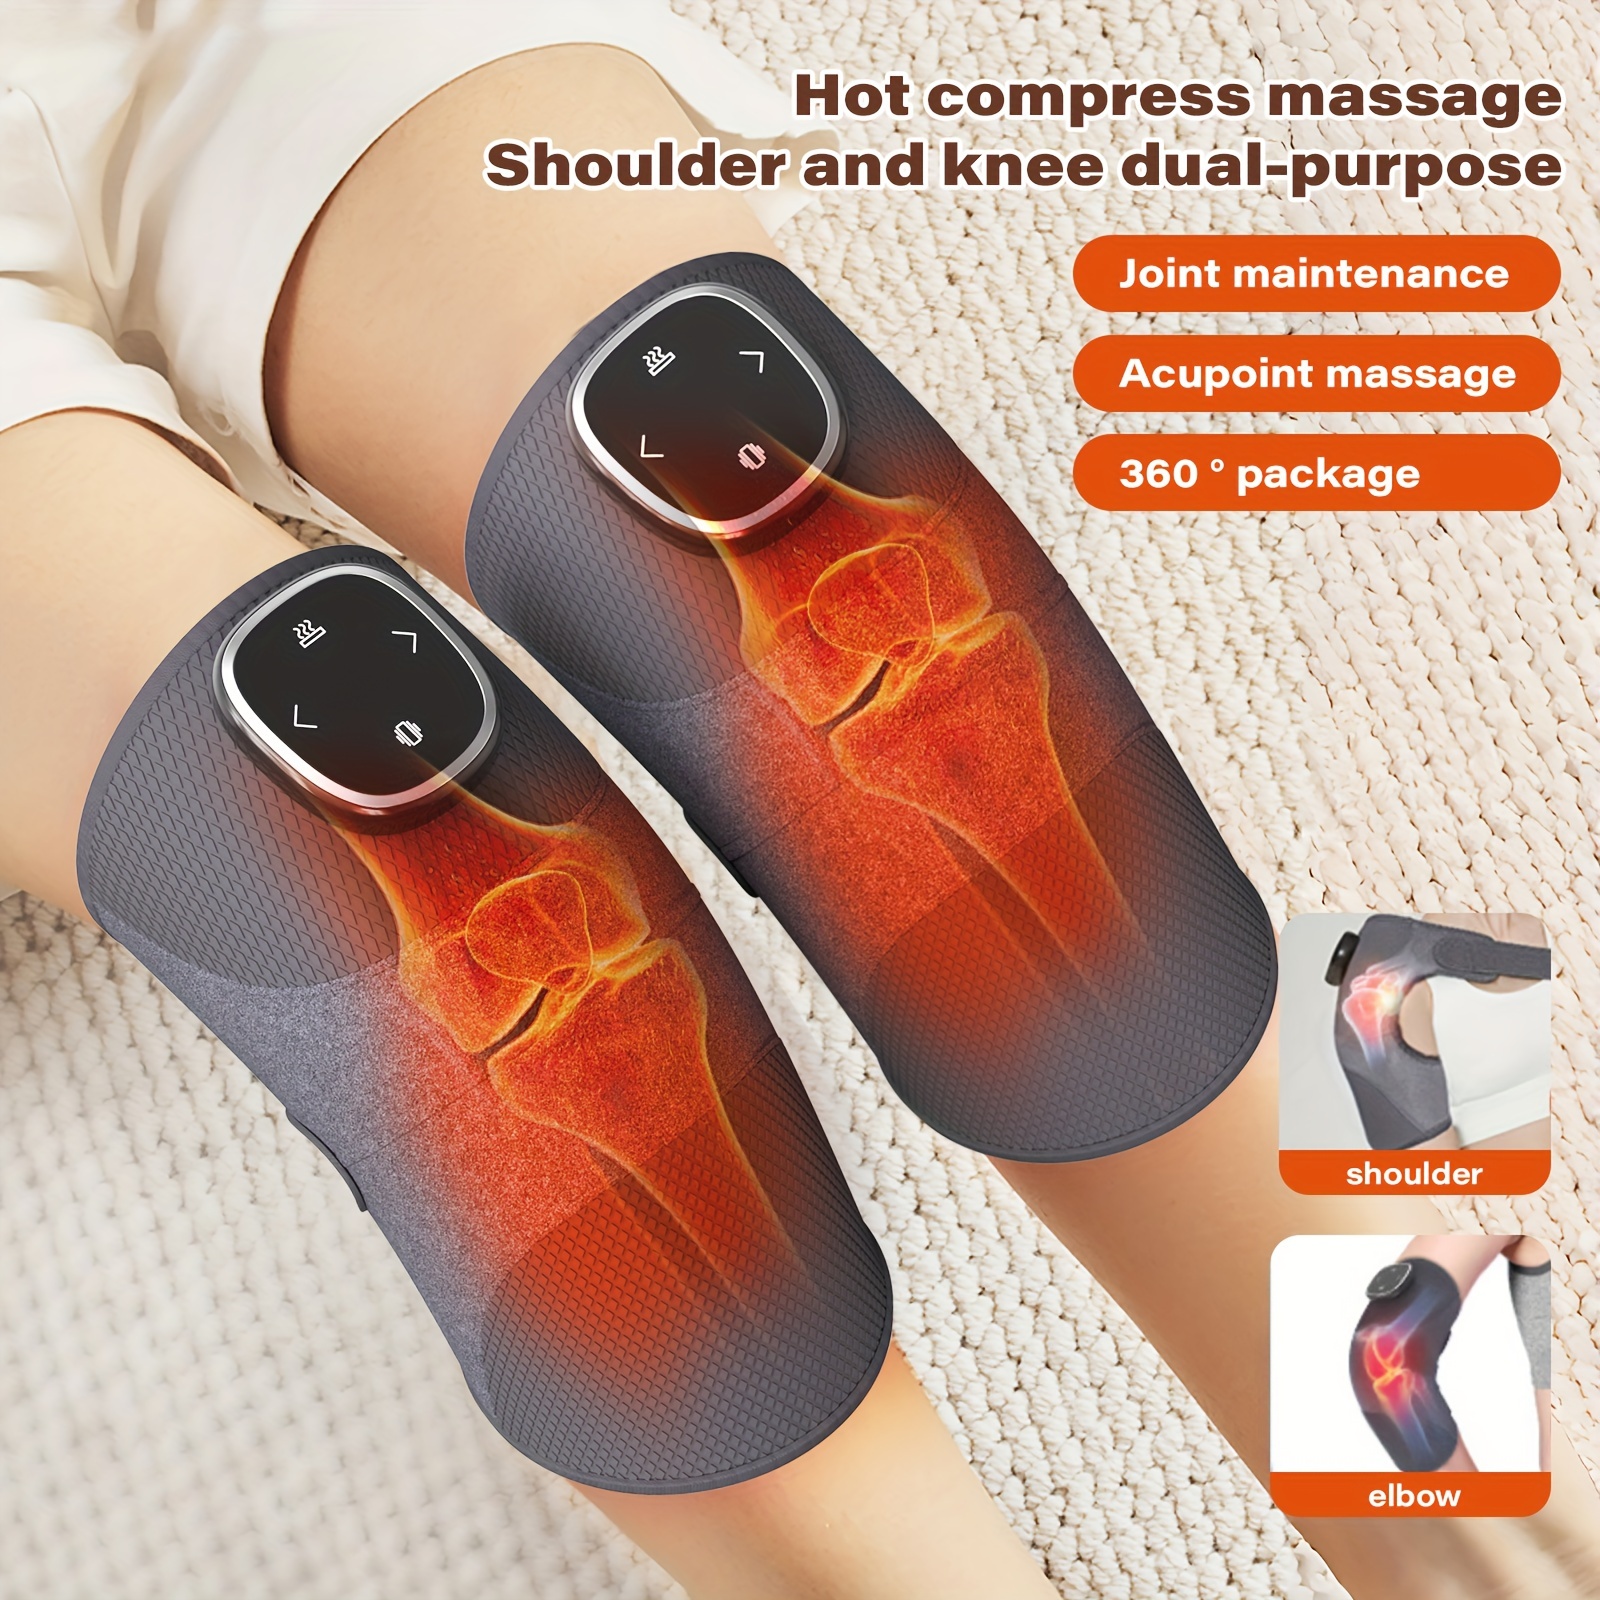 Heated Knee Massager,3-In-1 Heated Knee Brace Wrap, Vibration Knee Heating  Pad,3 Adjustable Vibrations and Heating Modes, Heating Pad for Knee Relax 